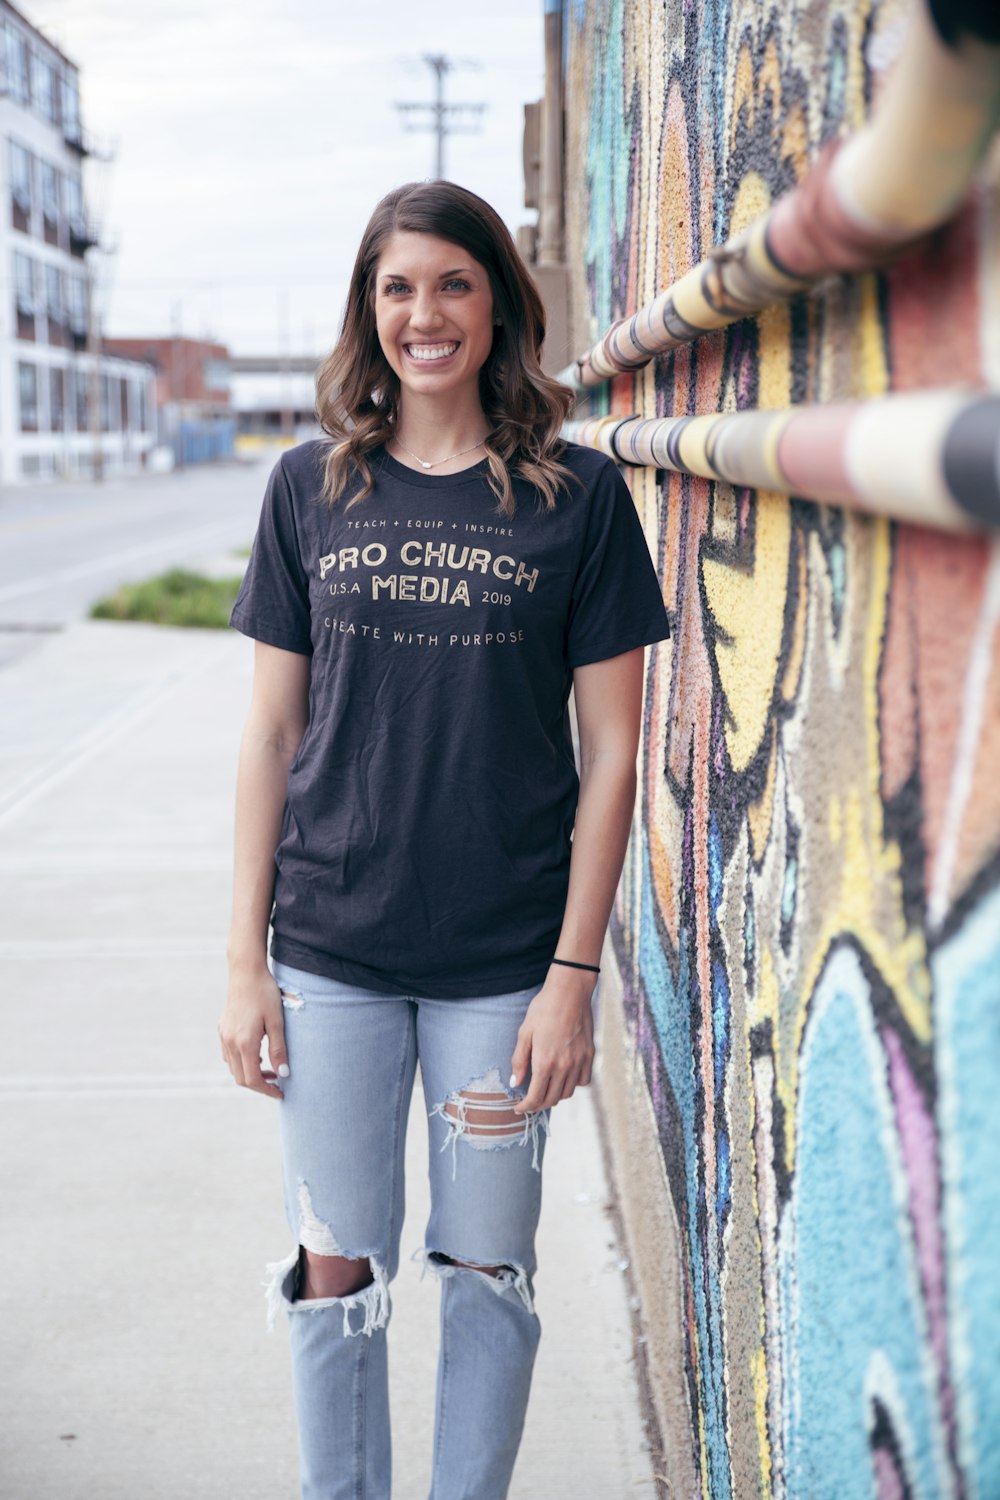 Woman In Black Crew Neck T-Shirt And Blue Denim Jeans Standing Beside Wall  With Graffiti Photo â€“ Free Clothing Image On Unsplash